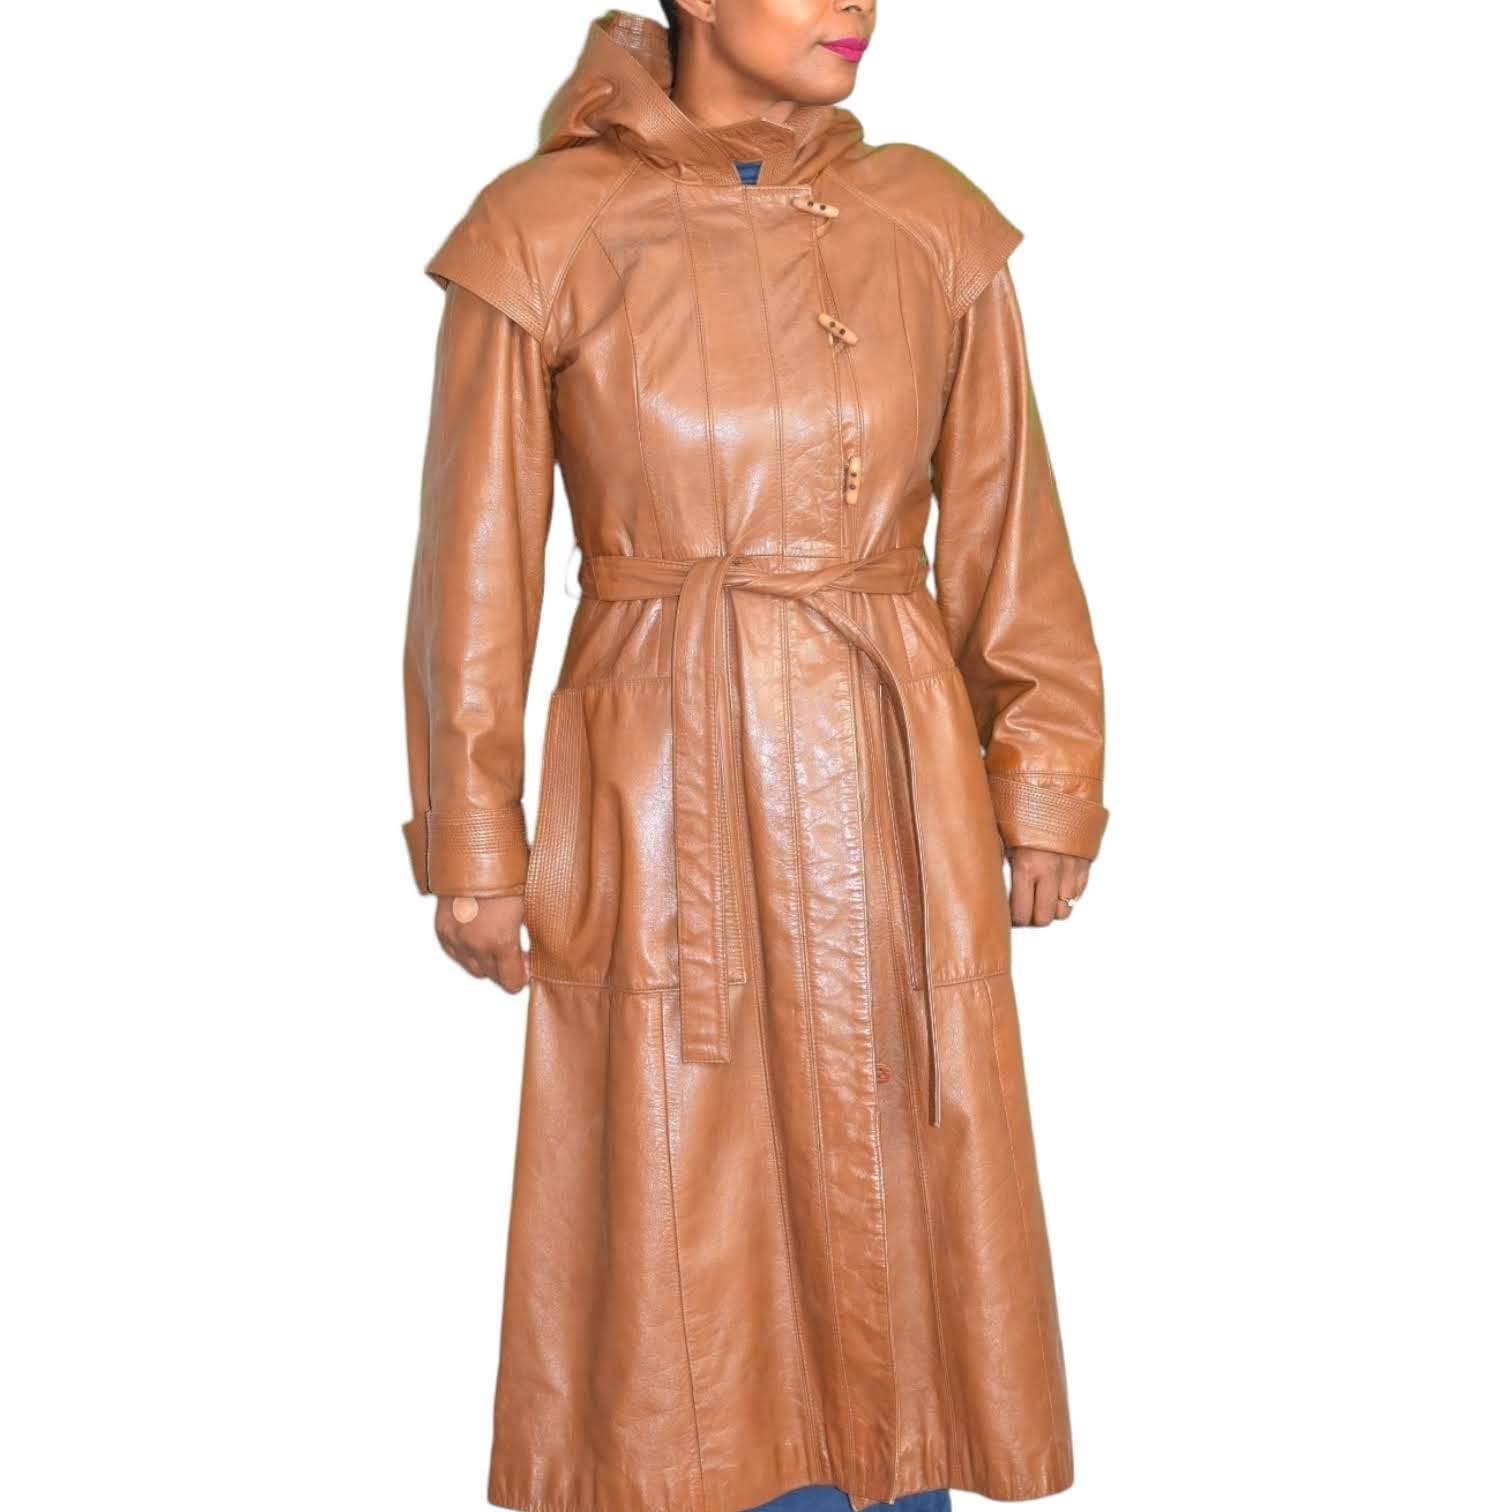 Leather Trench Coat Tan Brown Vintage Long Midi Hooded 80s Minimalist Size Small